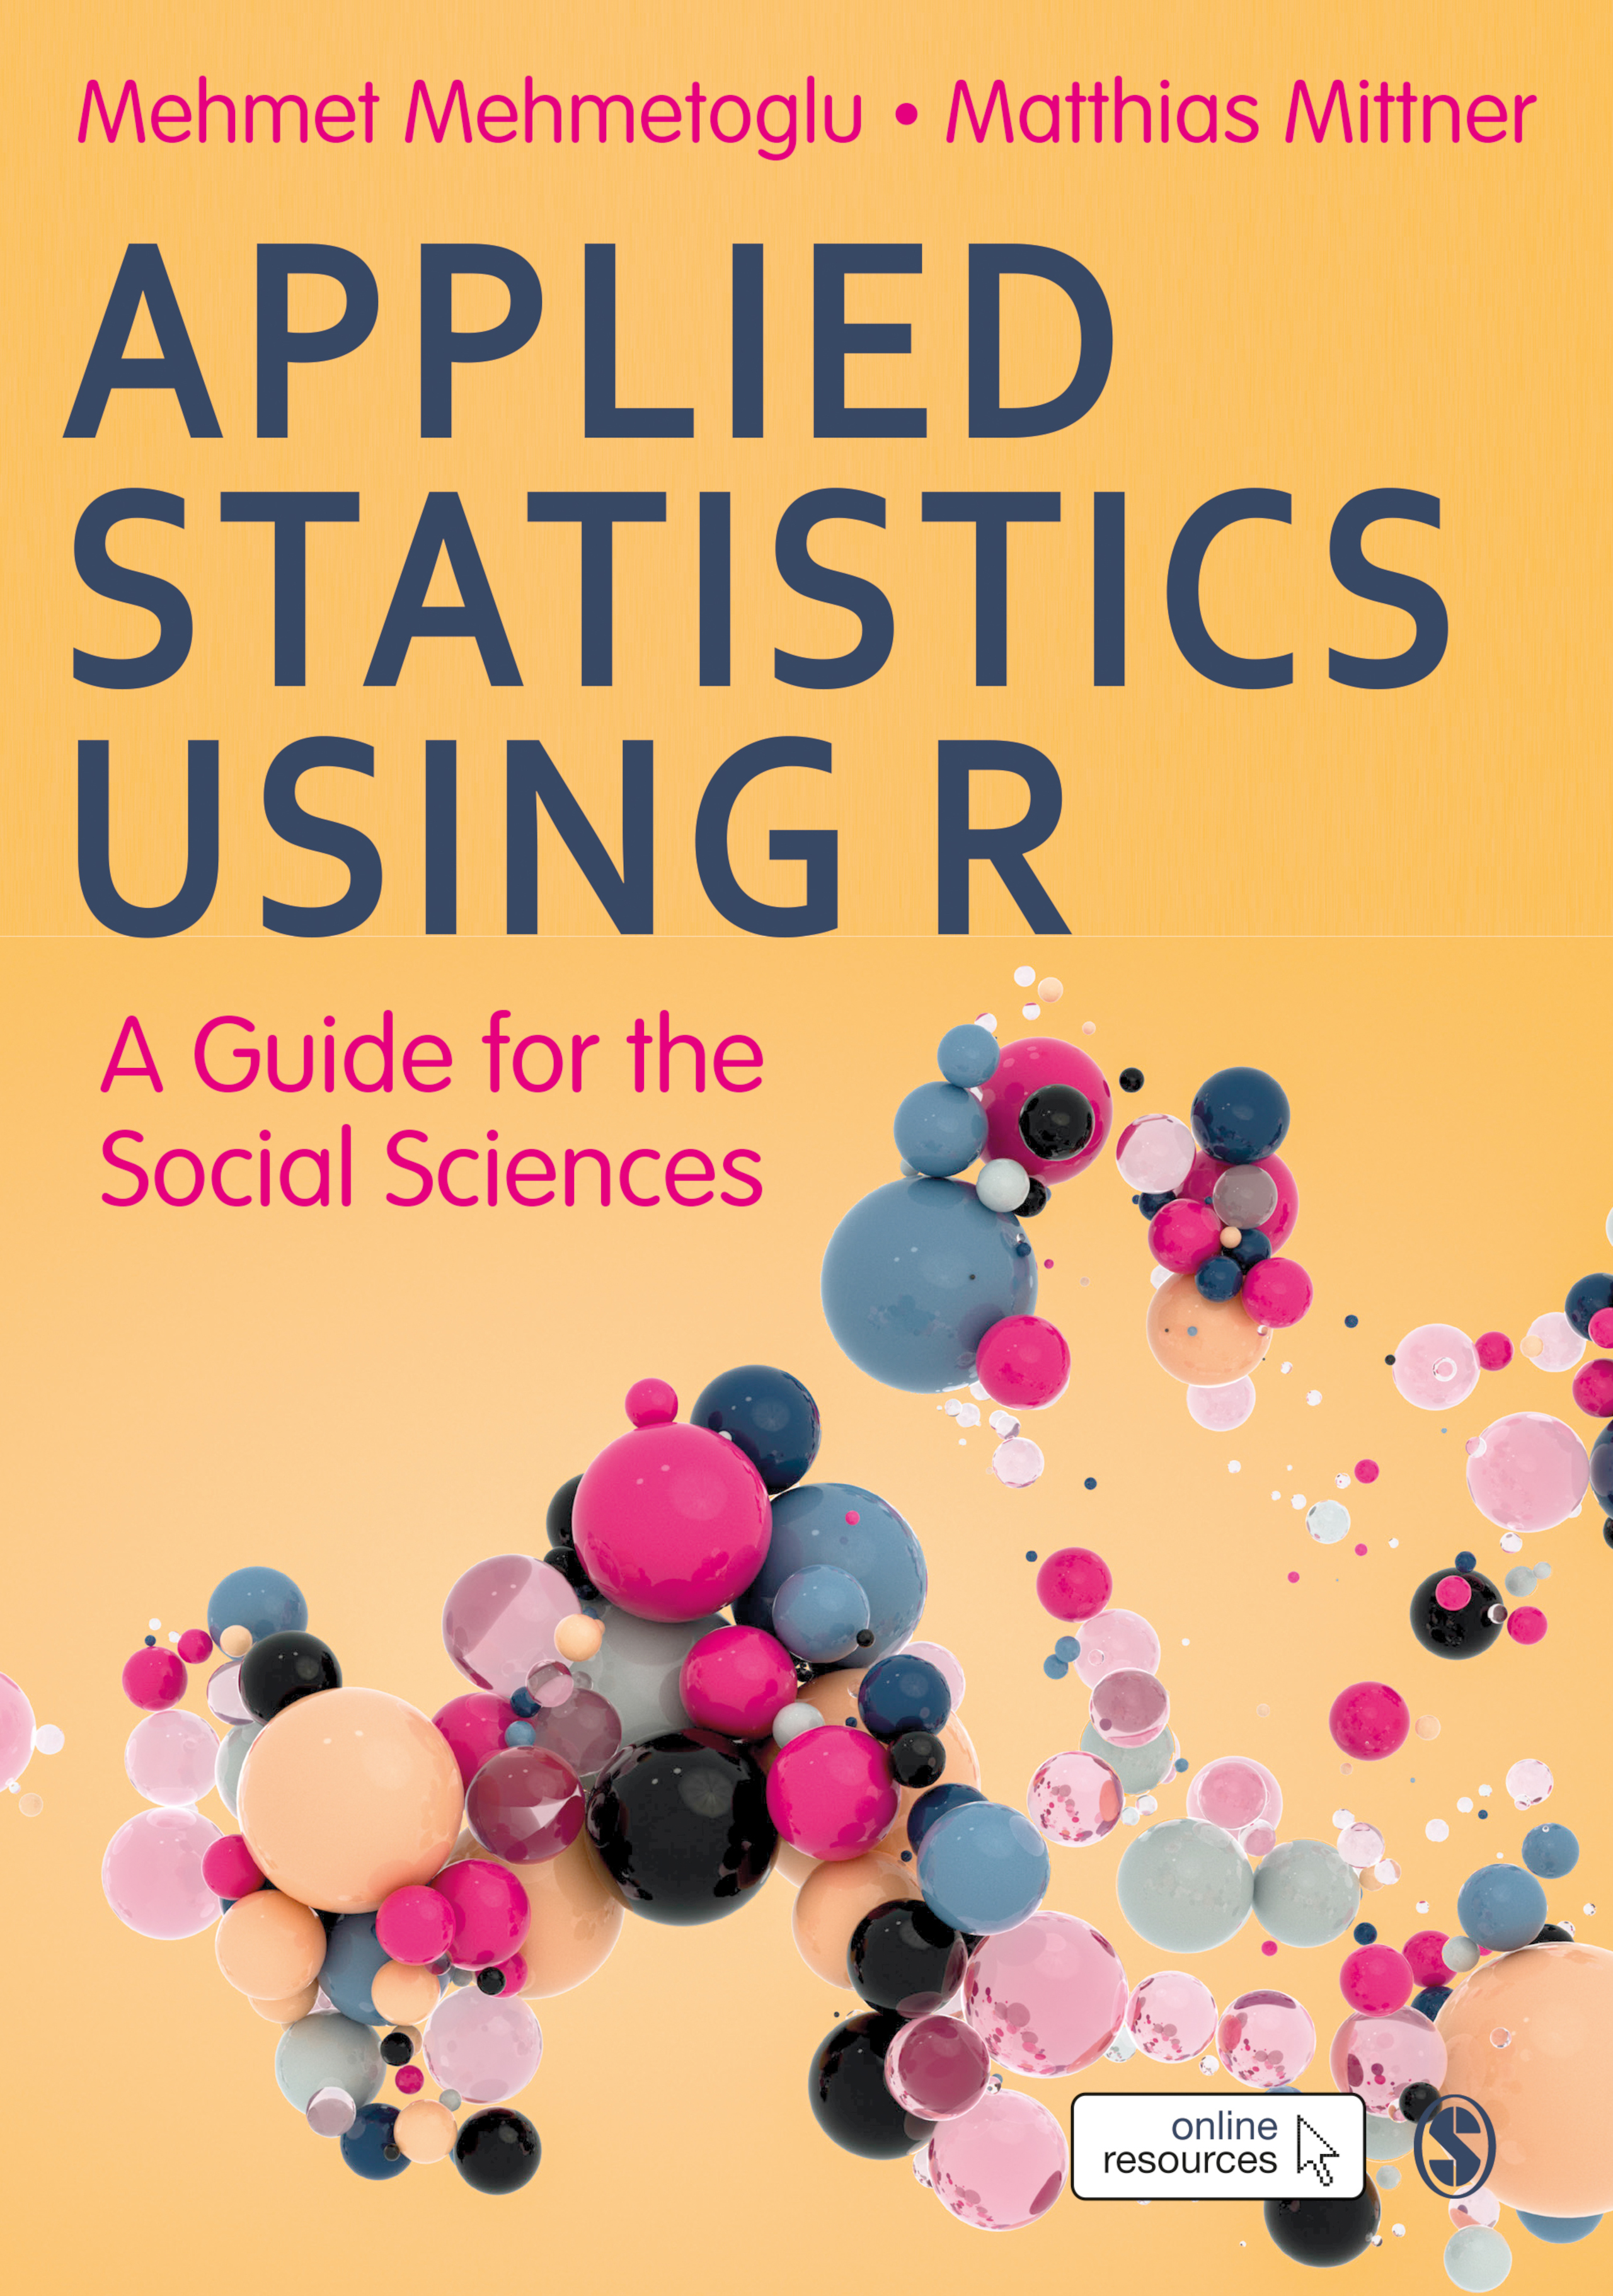 Applied Statistics Using R: A Guide for the Social Sciences (180-day access)